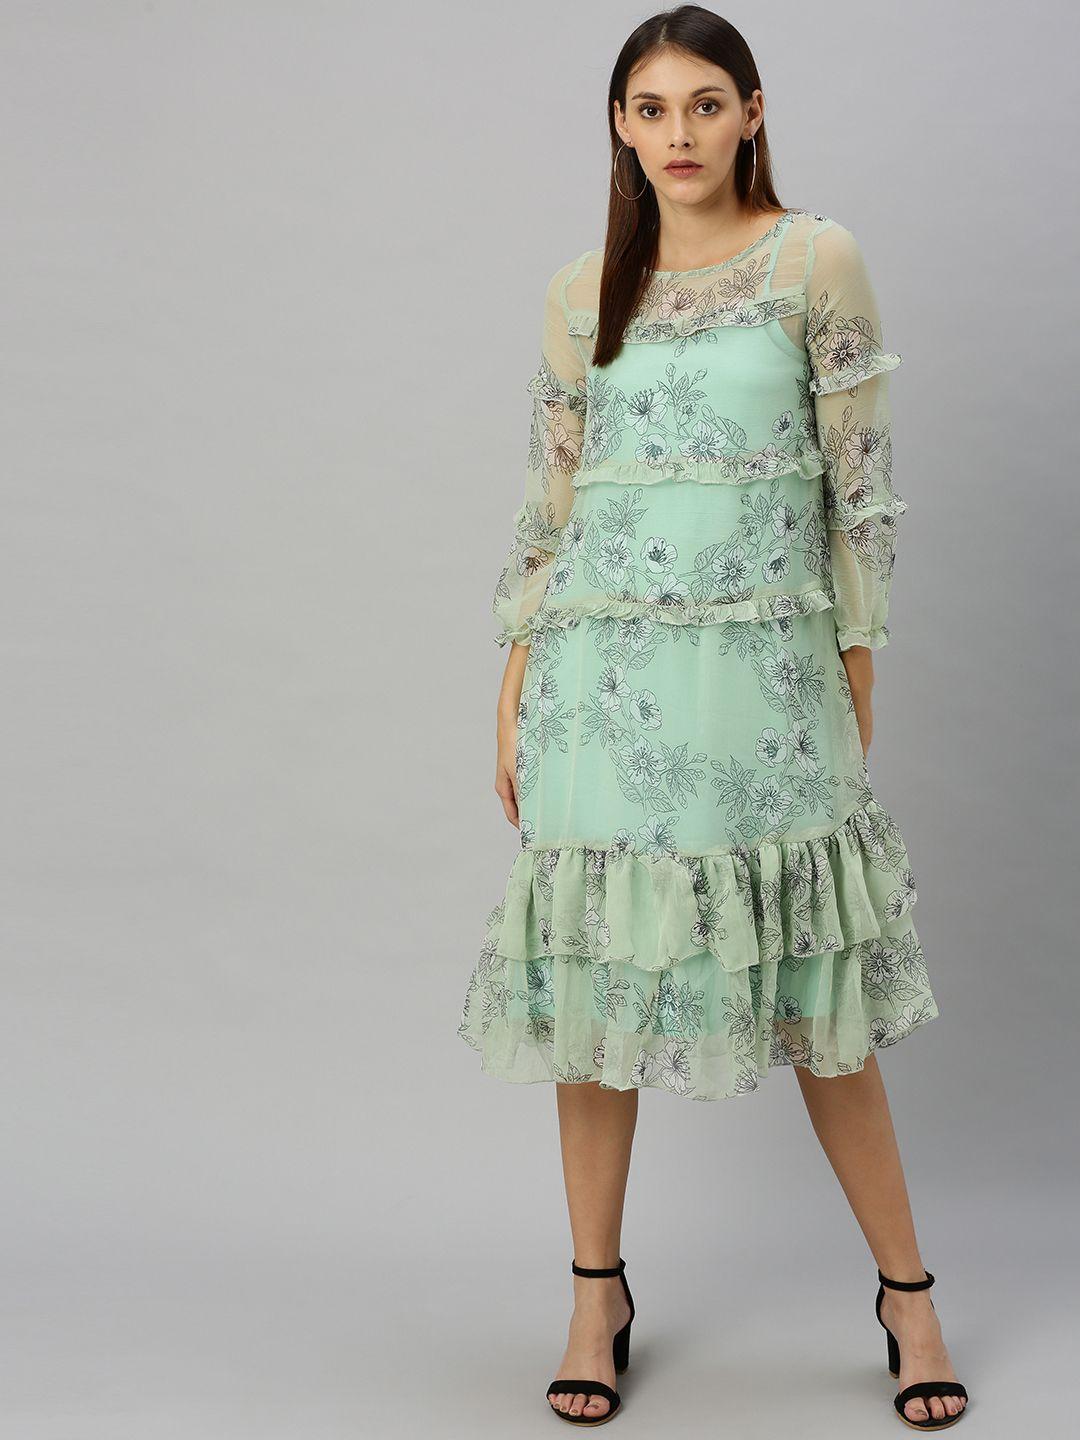 here&now women green printed layered fit and flare dress